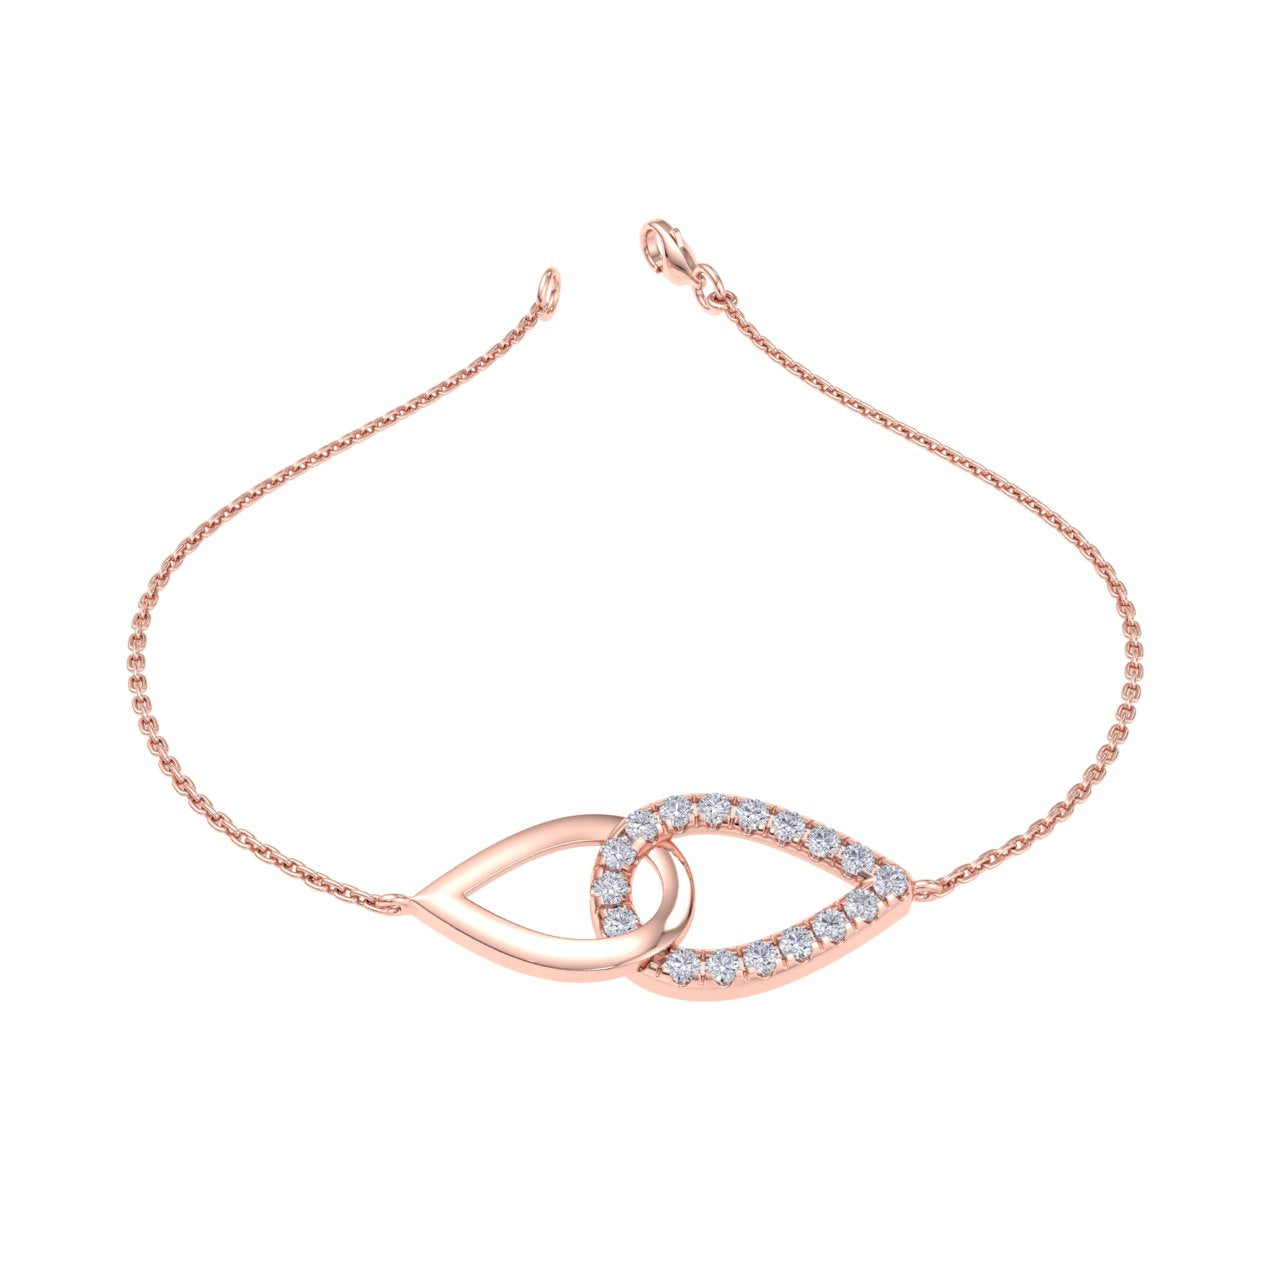 Bracelet in rose gold with white diamonds of 0.51 ct in weight